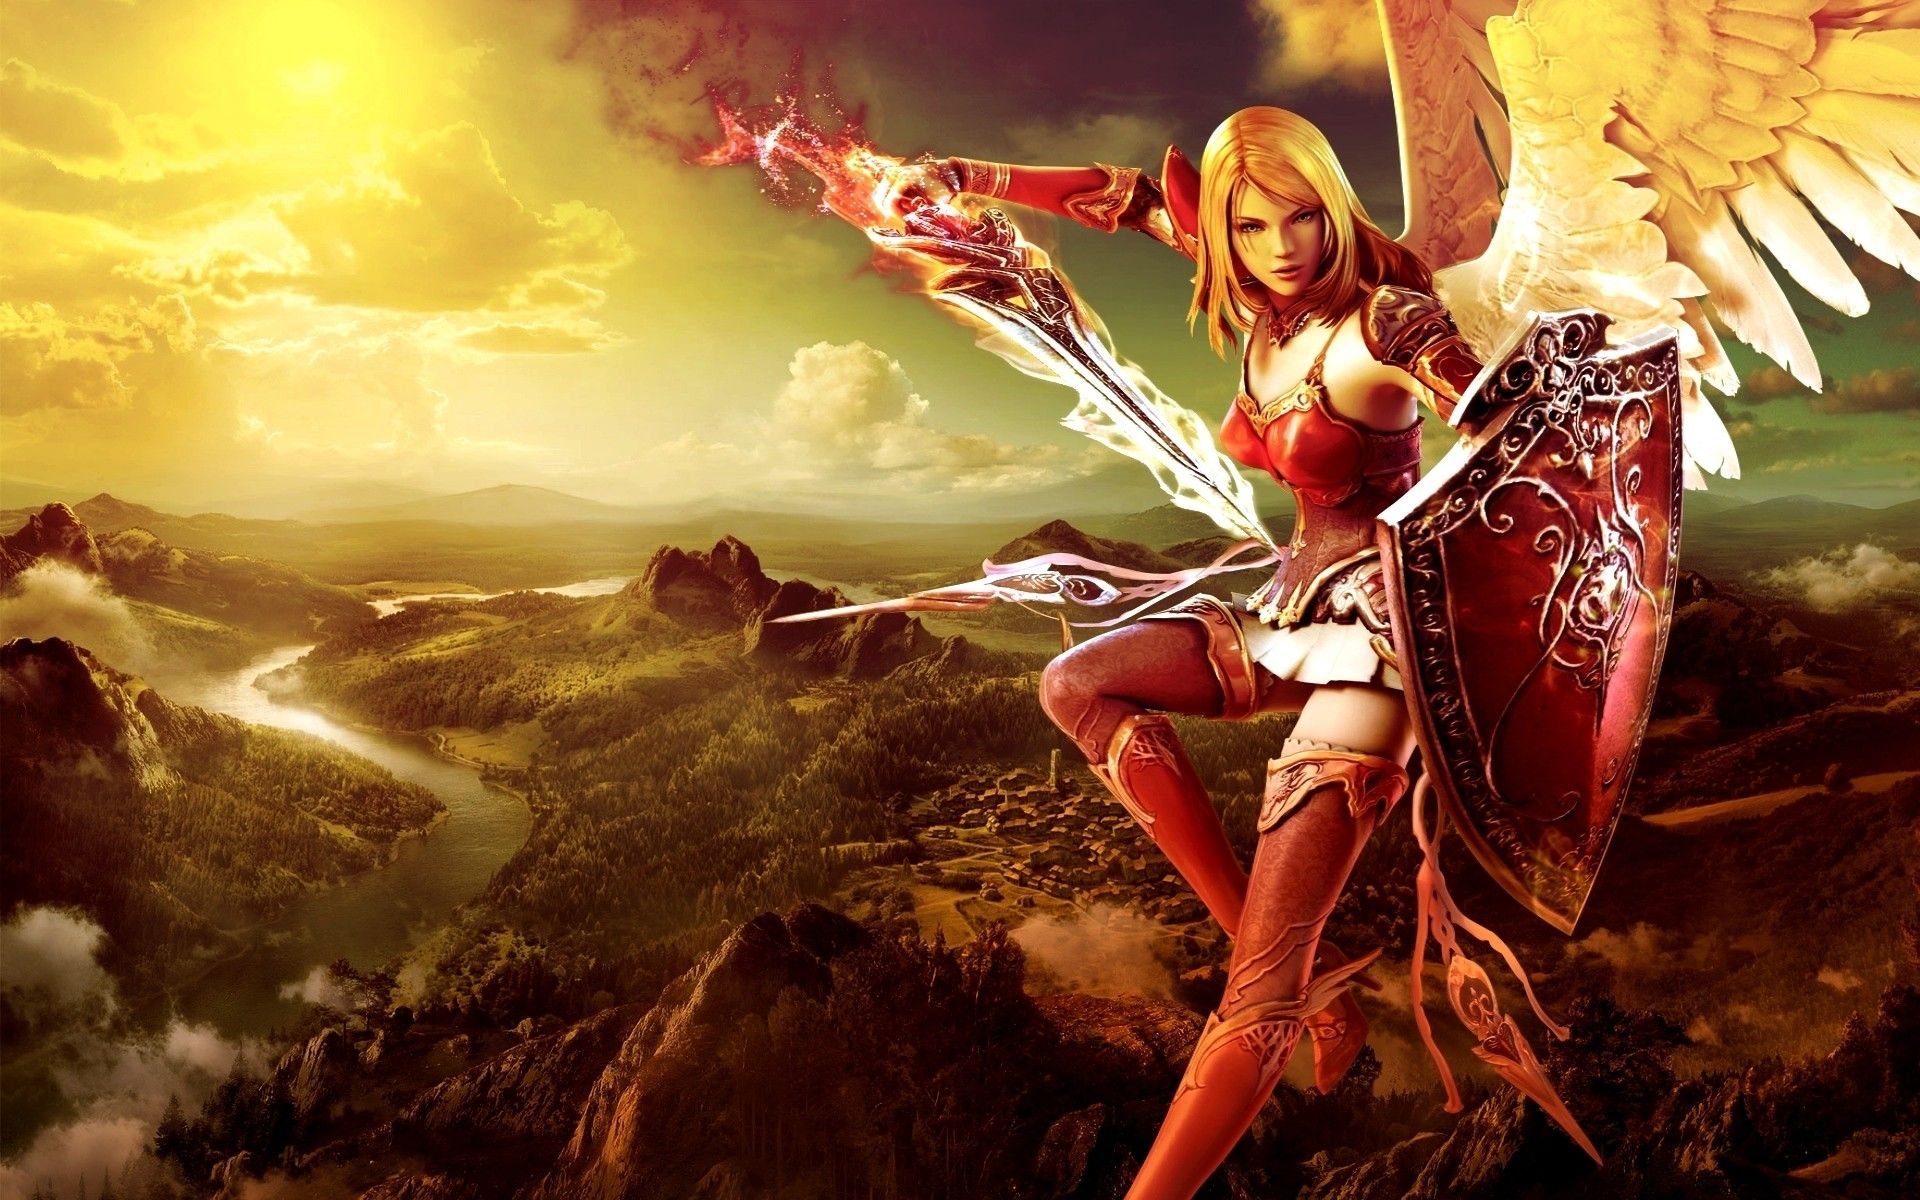 Free download Female Warrior Wallpaper High Definition High Quality [1920x1200] for your Desktop, Mobile & Tablet. Explore Anime Girl Warrior Wallpaper. Female Warrior Wallpaper, Anime Female Warrior Wallpaper